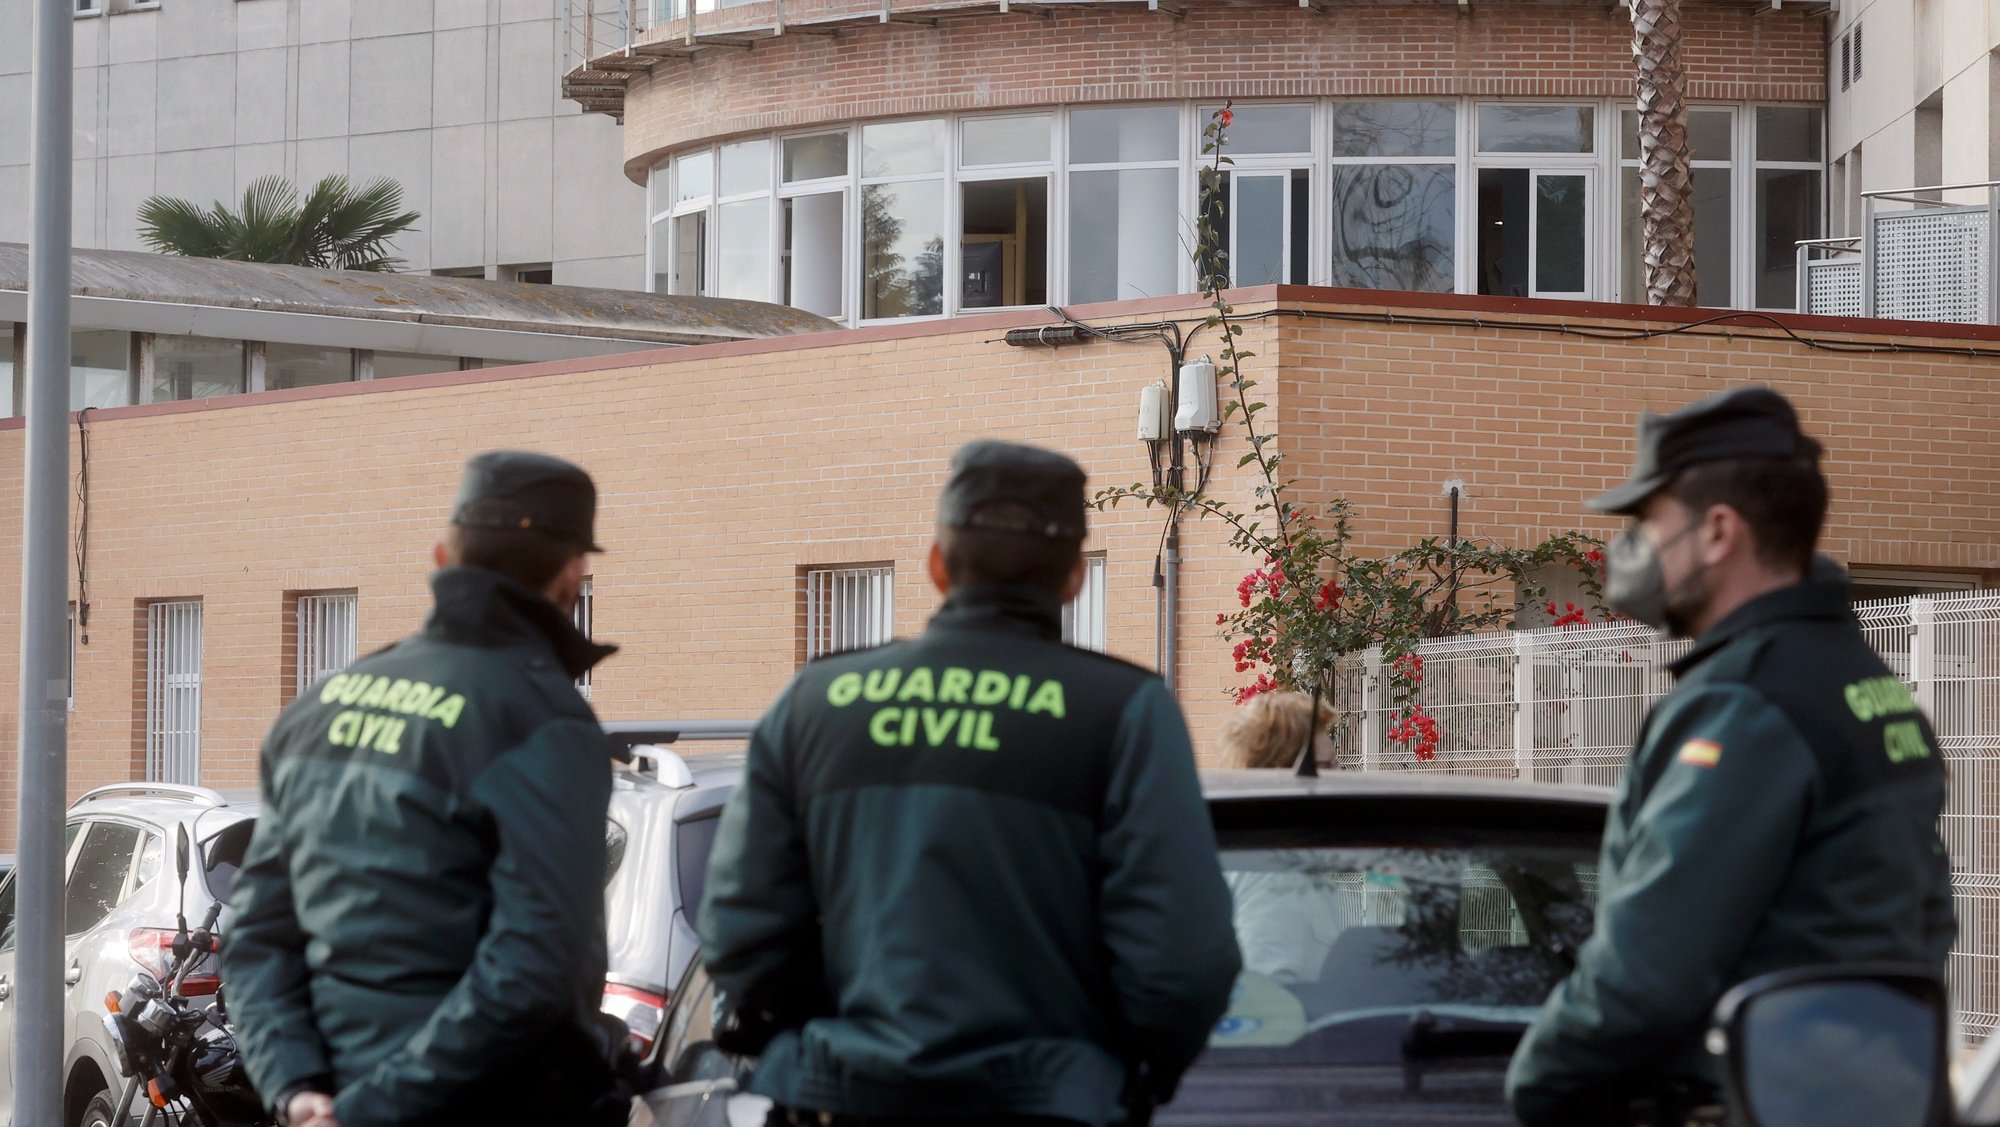 epa09694568 Civil Guard&#039;s officers stand guard outside an old people&#039;s home the morning after a fire started in the facilities, in the town of Moncada, Valencia, Spain, 19 January 2022. Six people died and 15 other were injured in the fire that caused 70 residents had to be evacuated.  EPA/KAI FOERSTERLING